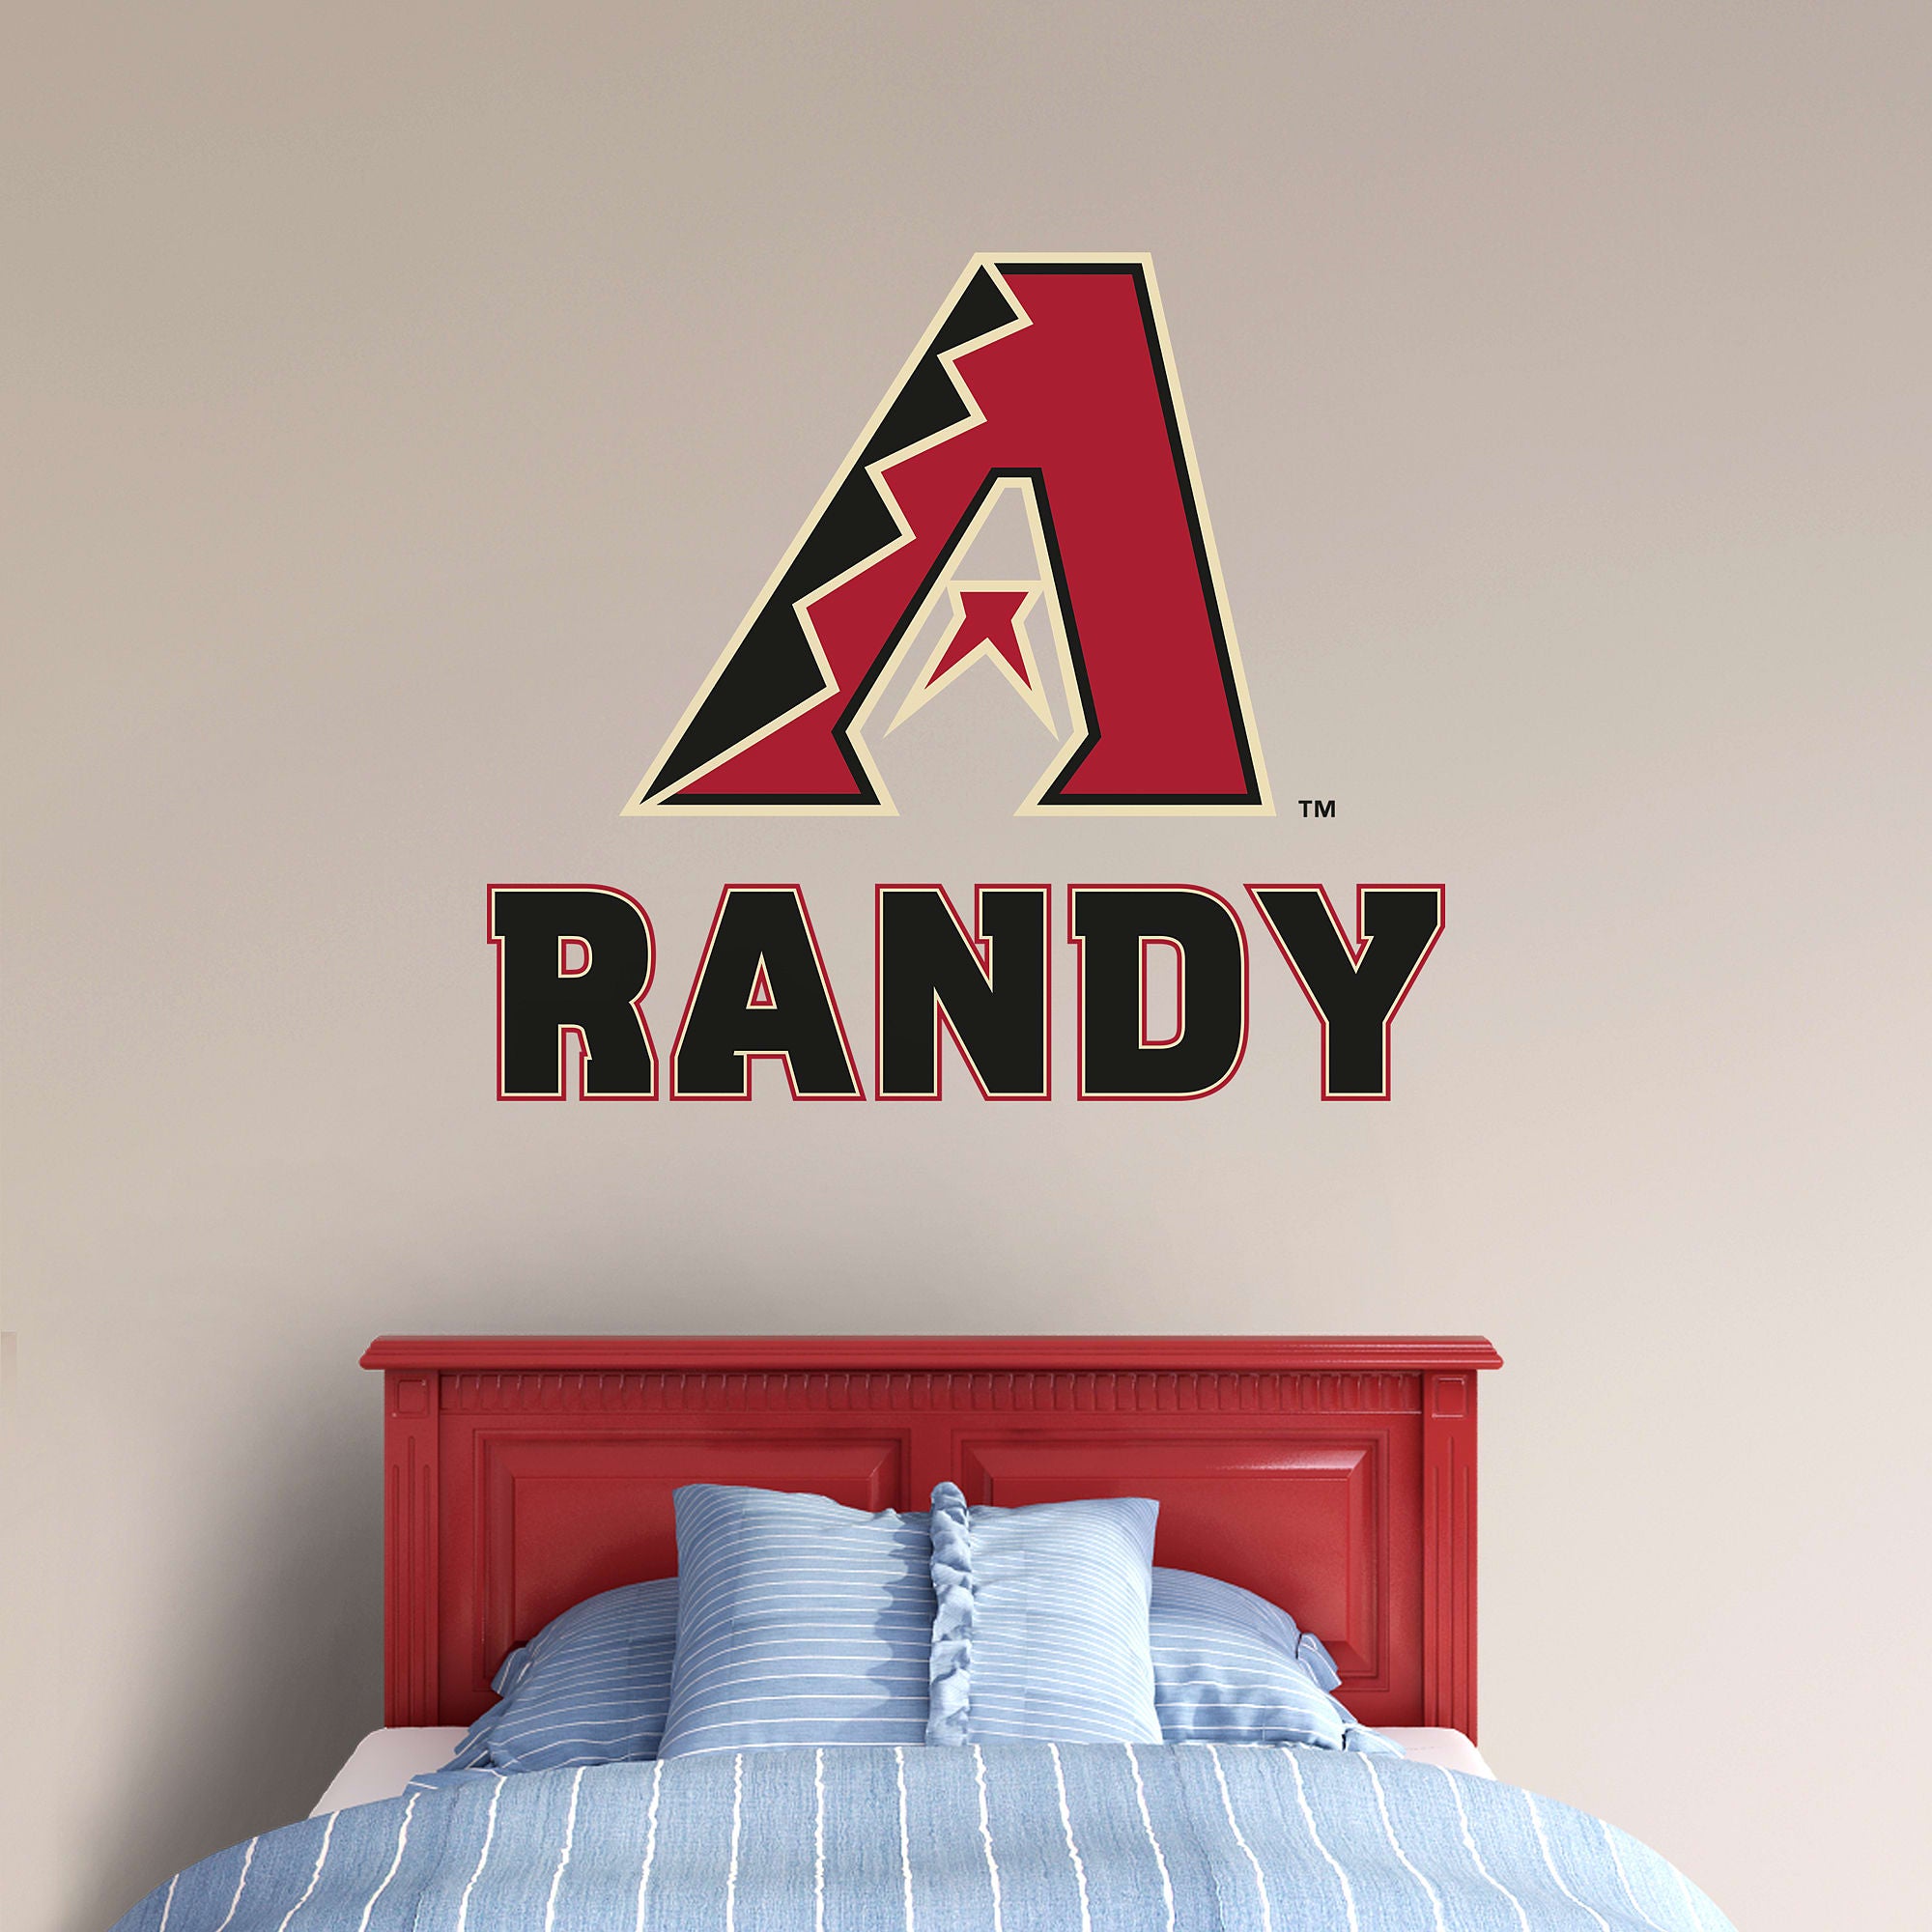 Arizona Diamondbacks: Stacked Personalized Name - Officially Licensed MLB Transfer Decal in Black (52"W x 39.5"H) by Fathead | V